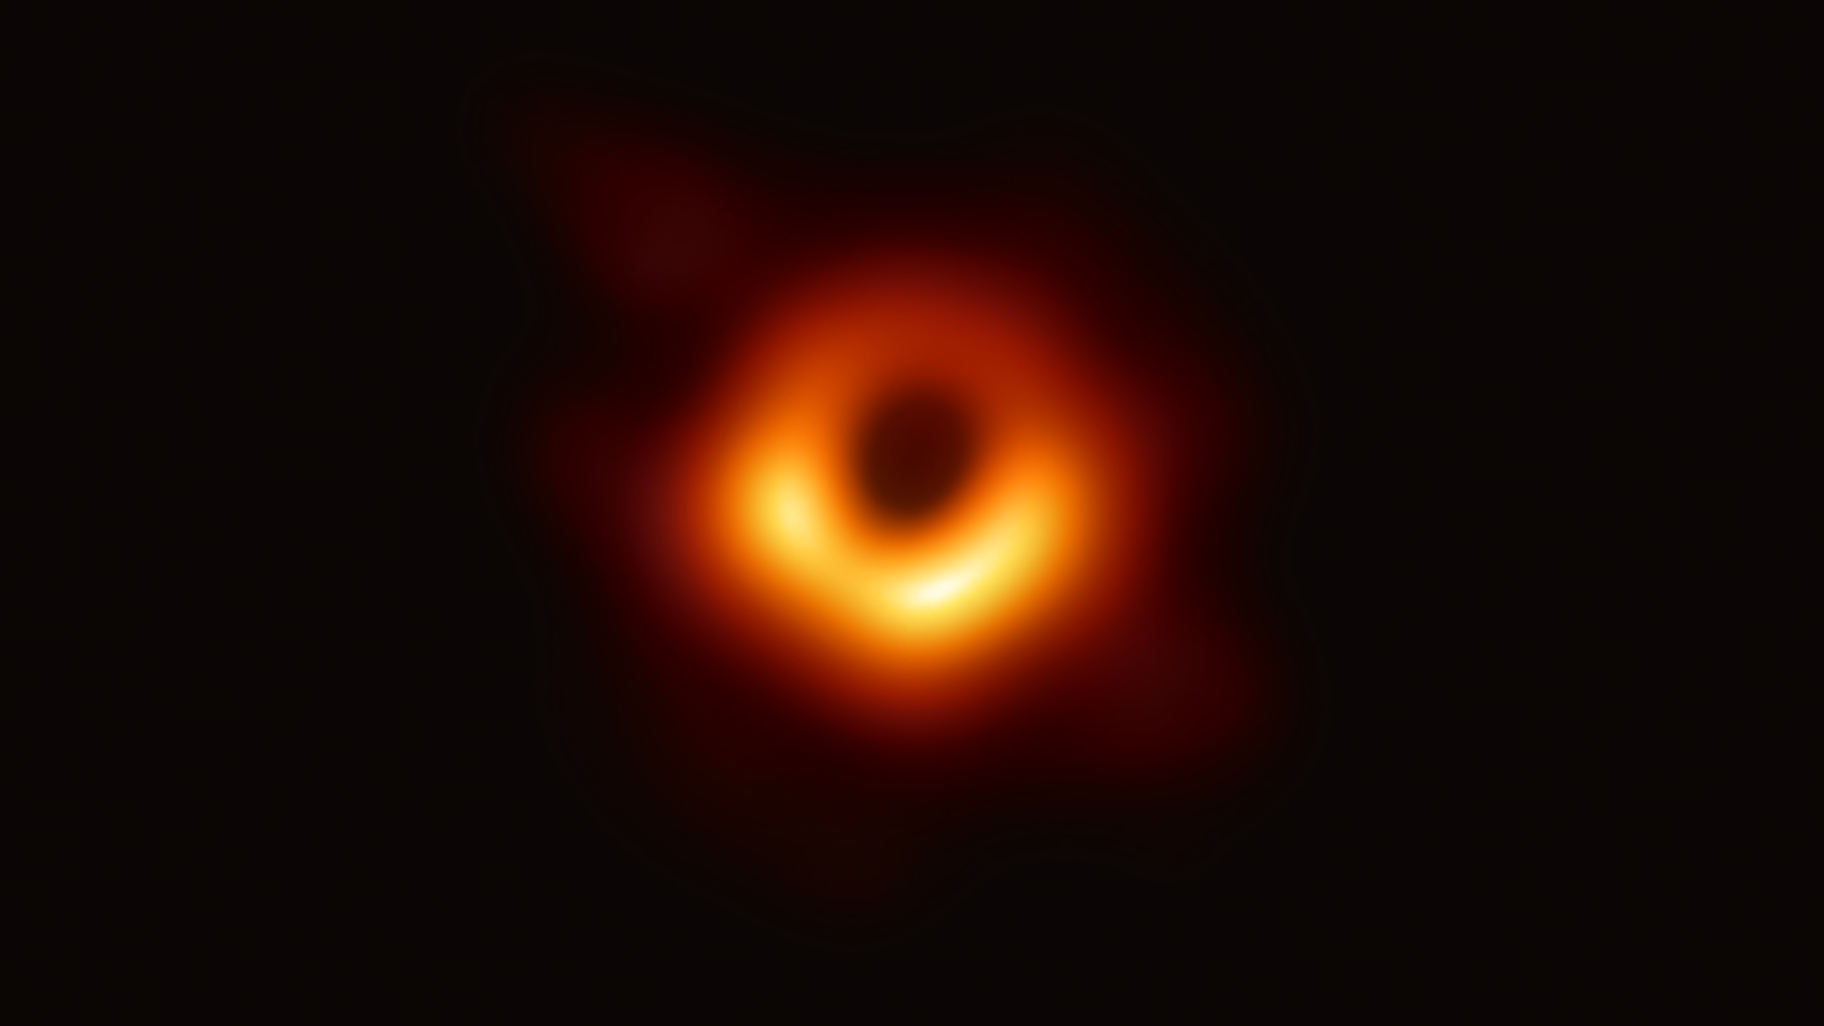 Using the Event Horizon Telescope, scientists obtained an image of the black hole at the center of galaxy M87, outlined by emission from hot gas swirling around it under the influence of strong gravity near its event horizon. (Credits: Event Horizon Telescope collaboration et al.)